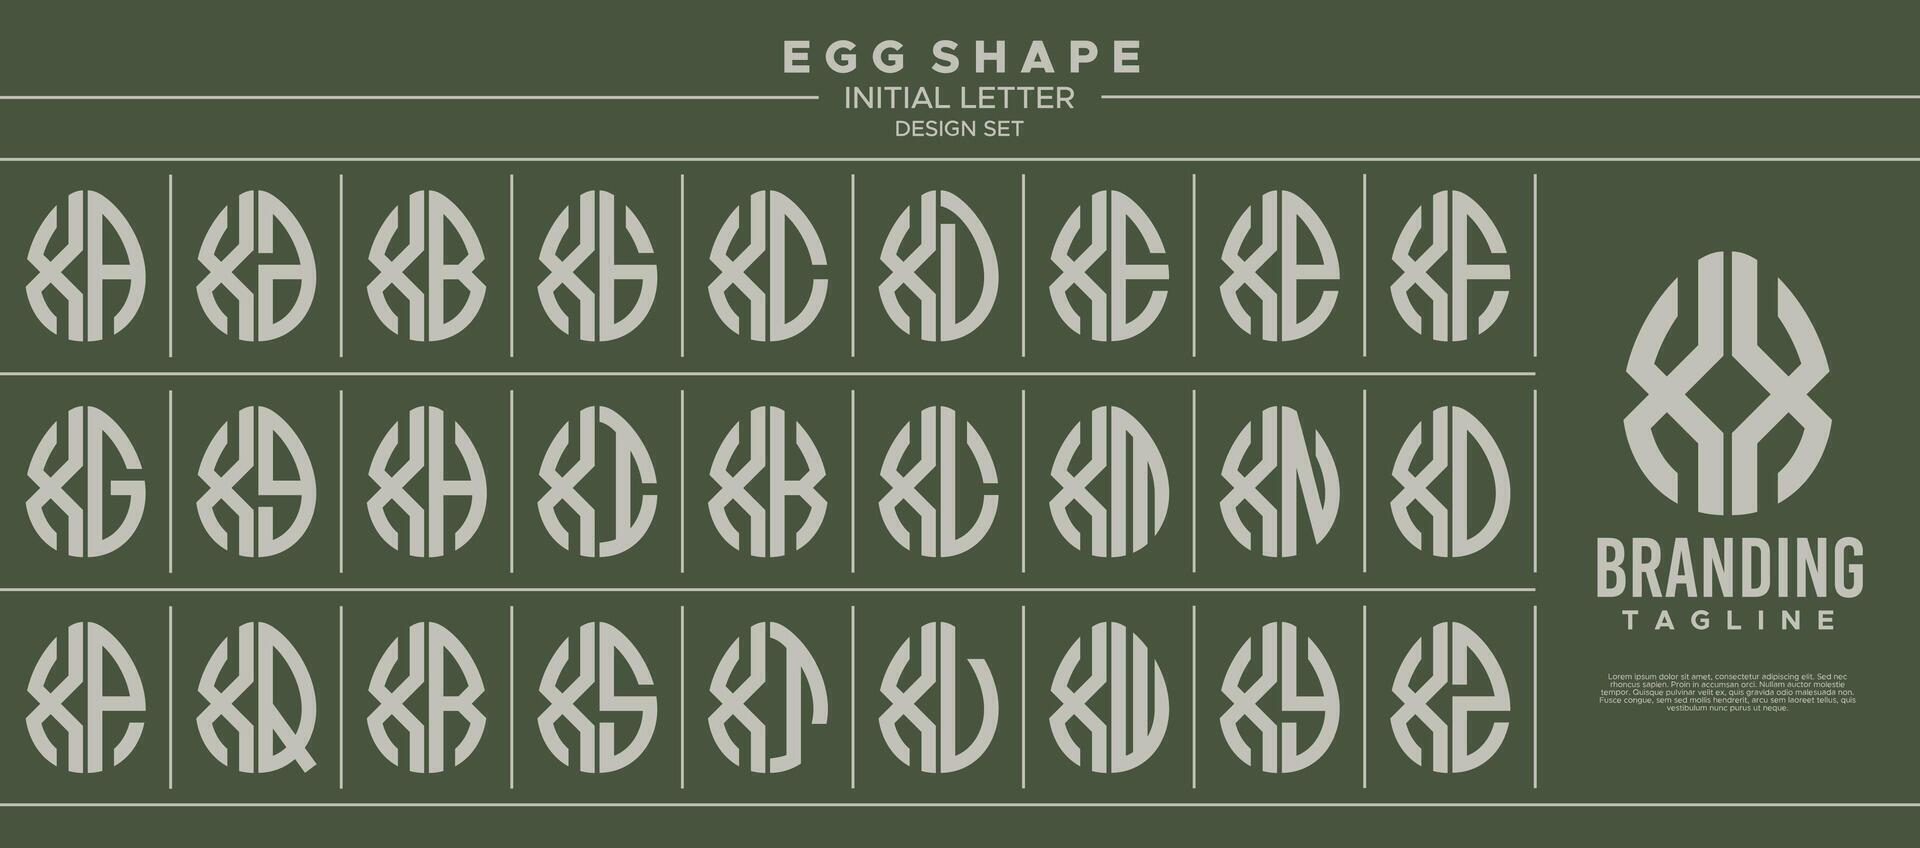 Collection of food egg shape initial letter X XX logo design vector